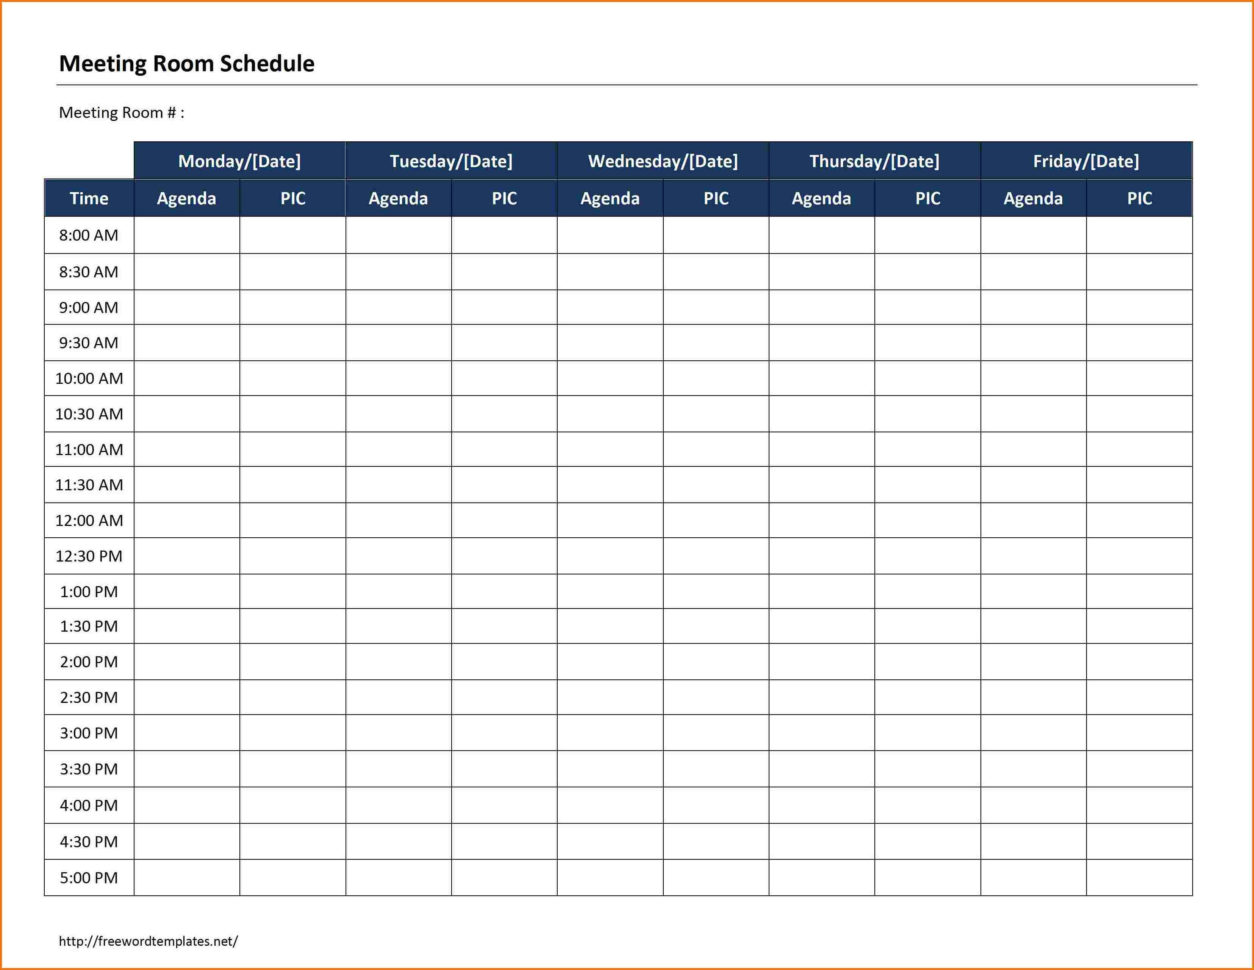 submittal-tracking-spreadsheet-regarding-submittal-schedule-template-excel-my-spreadsheet